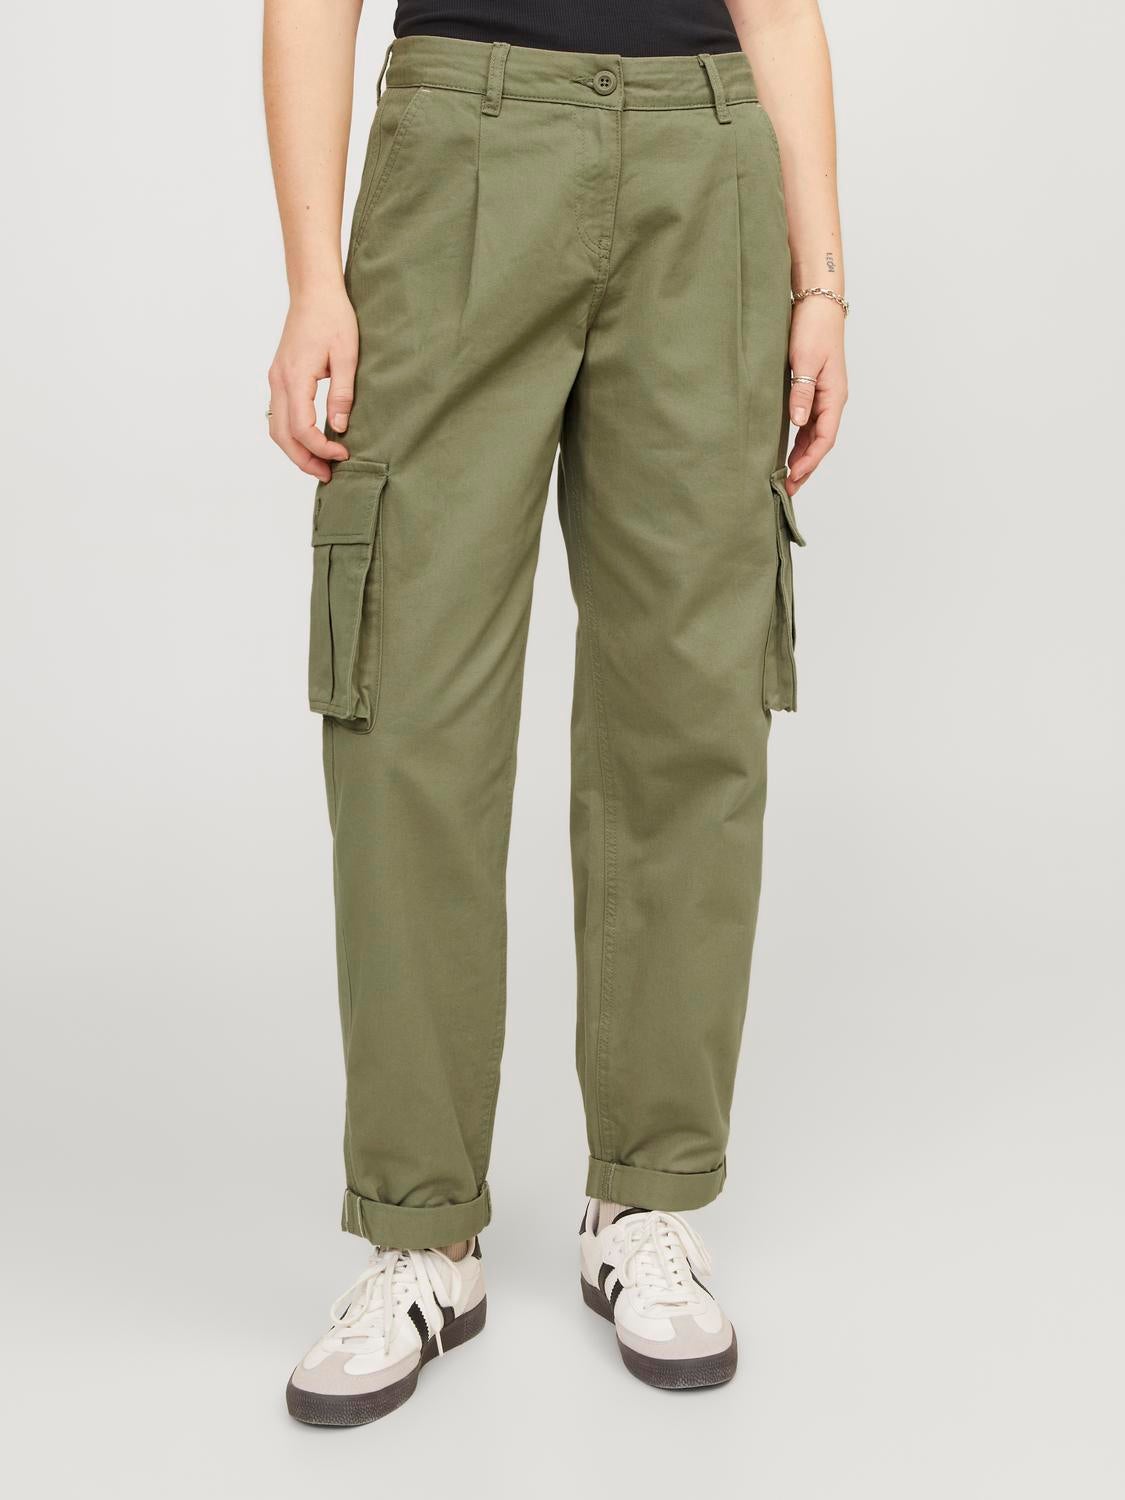 Citizens of Humanity Agni Utility Trousers | Anthropologie Japan - Women's  Clothing, Accessories & Home